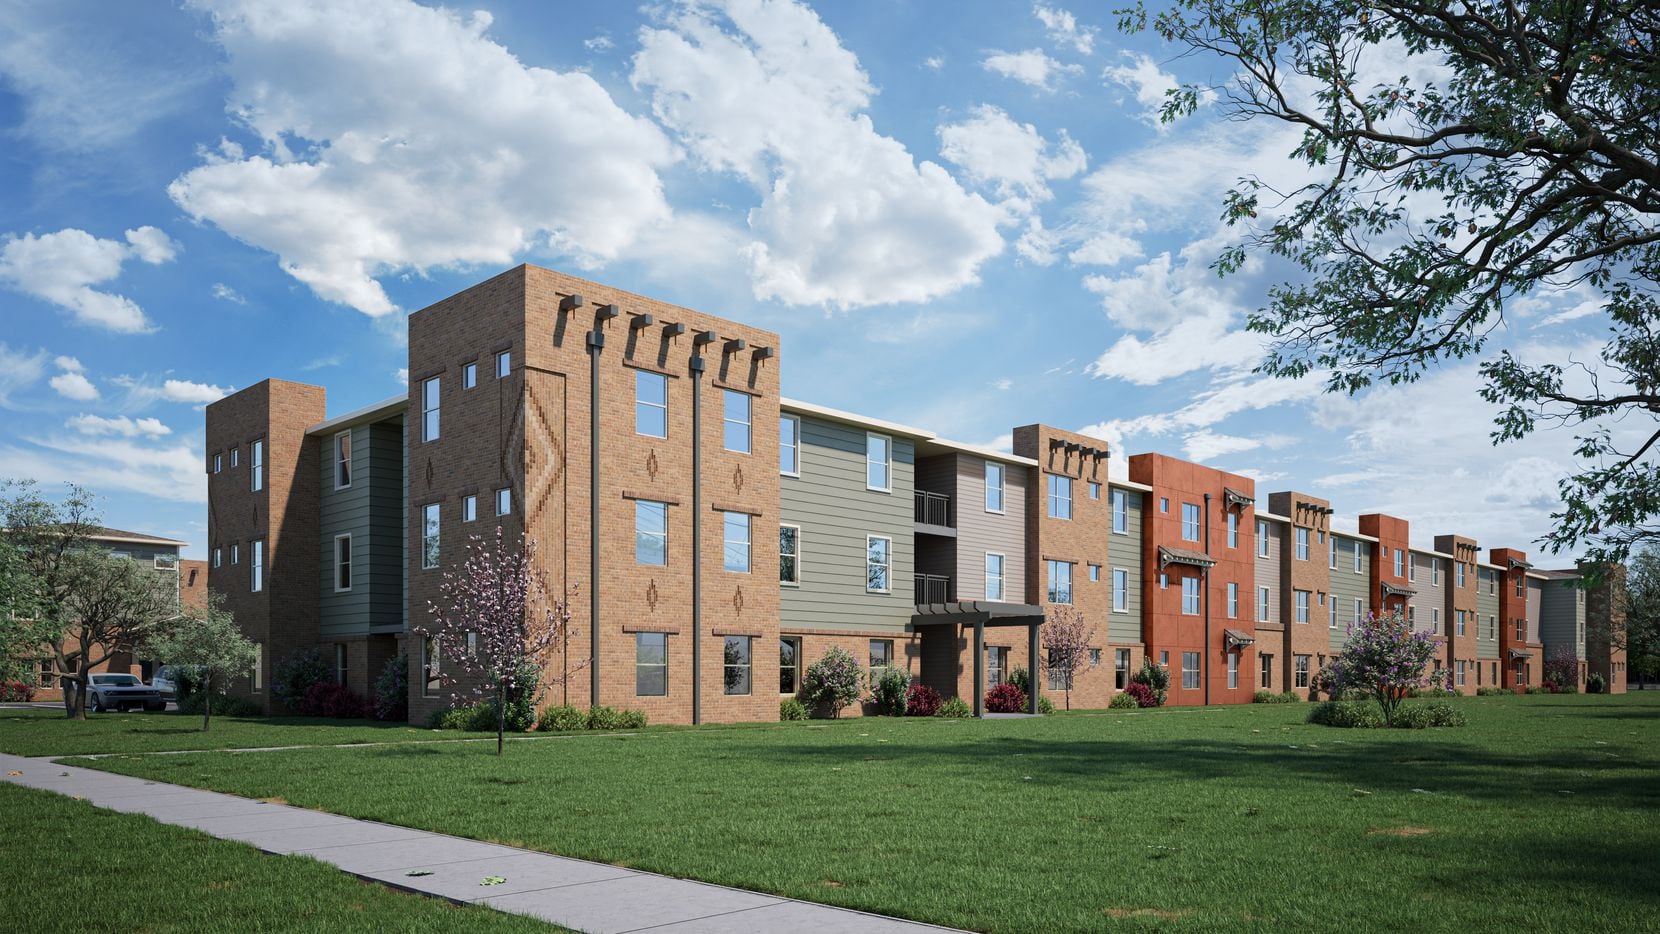 A rendering of the 87-unit affordable housing project by Saigebrook Development and O-SDA...